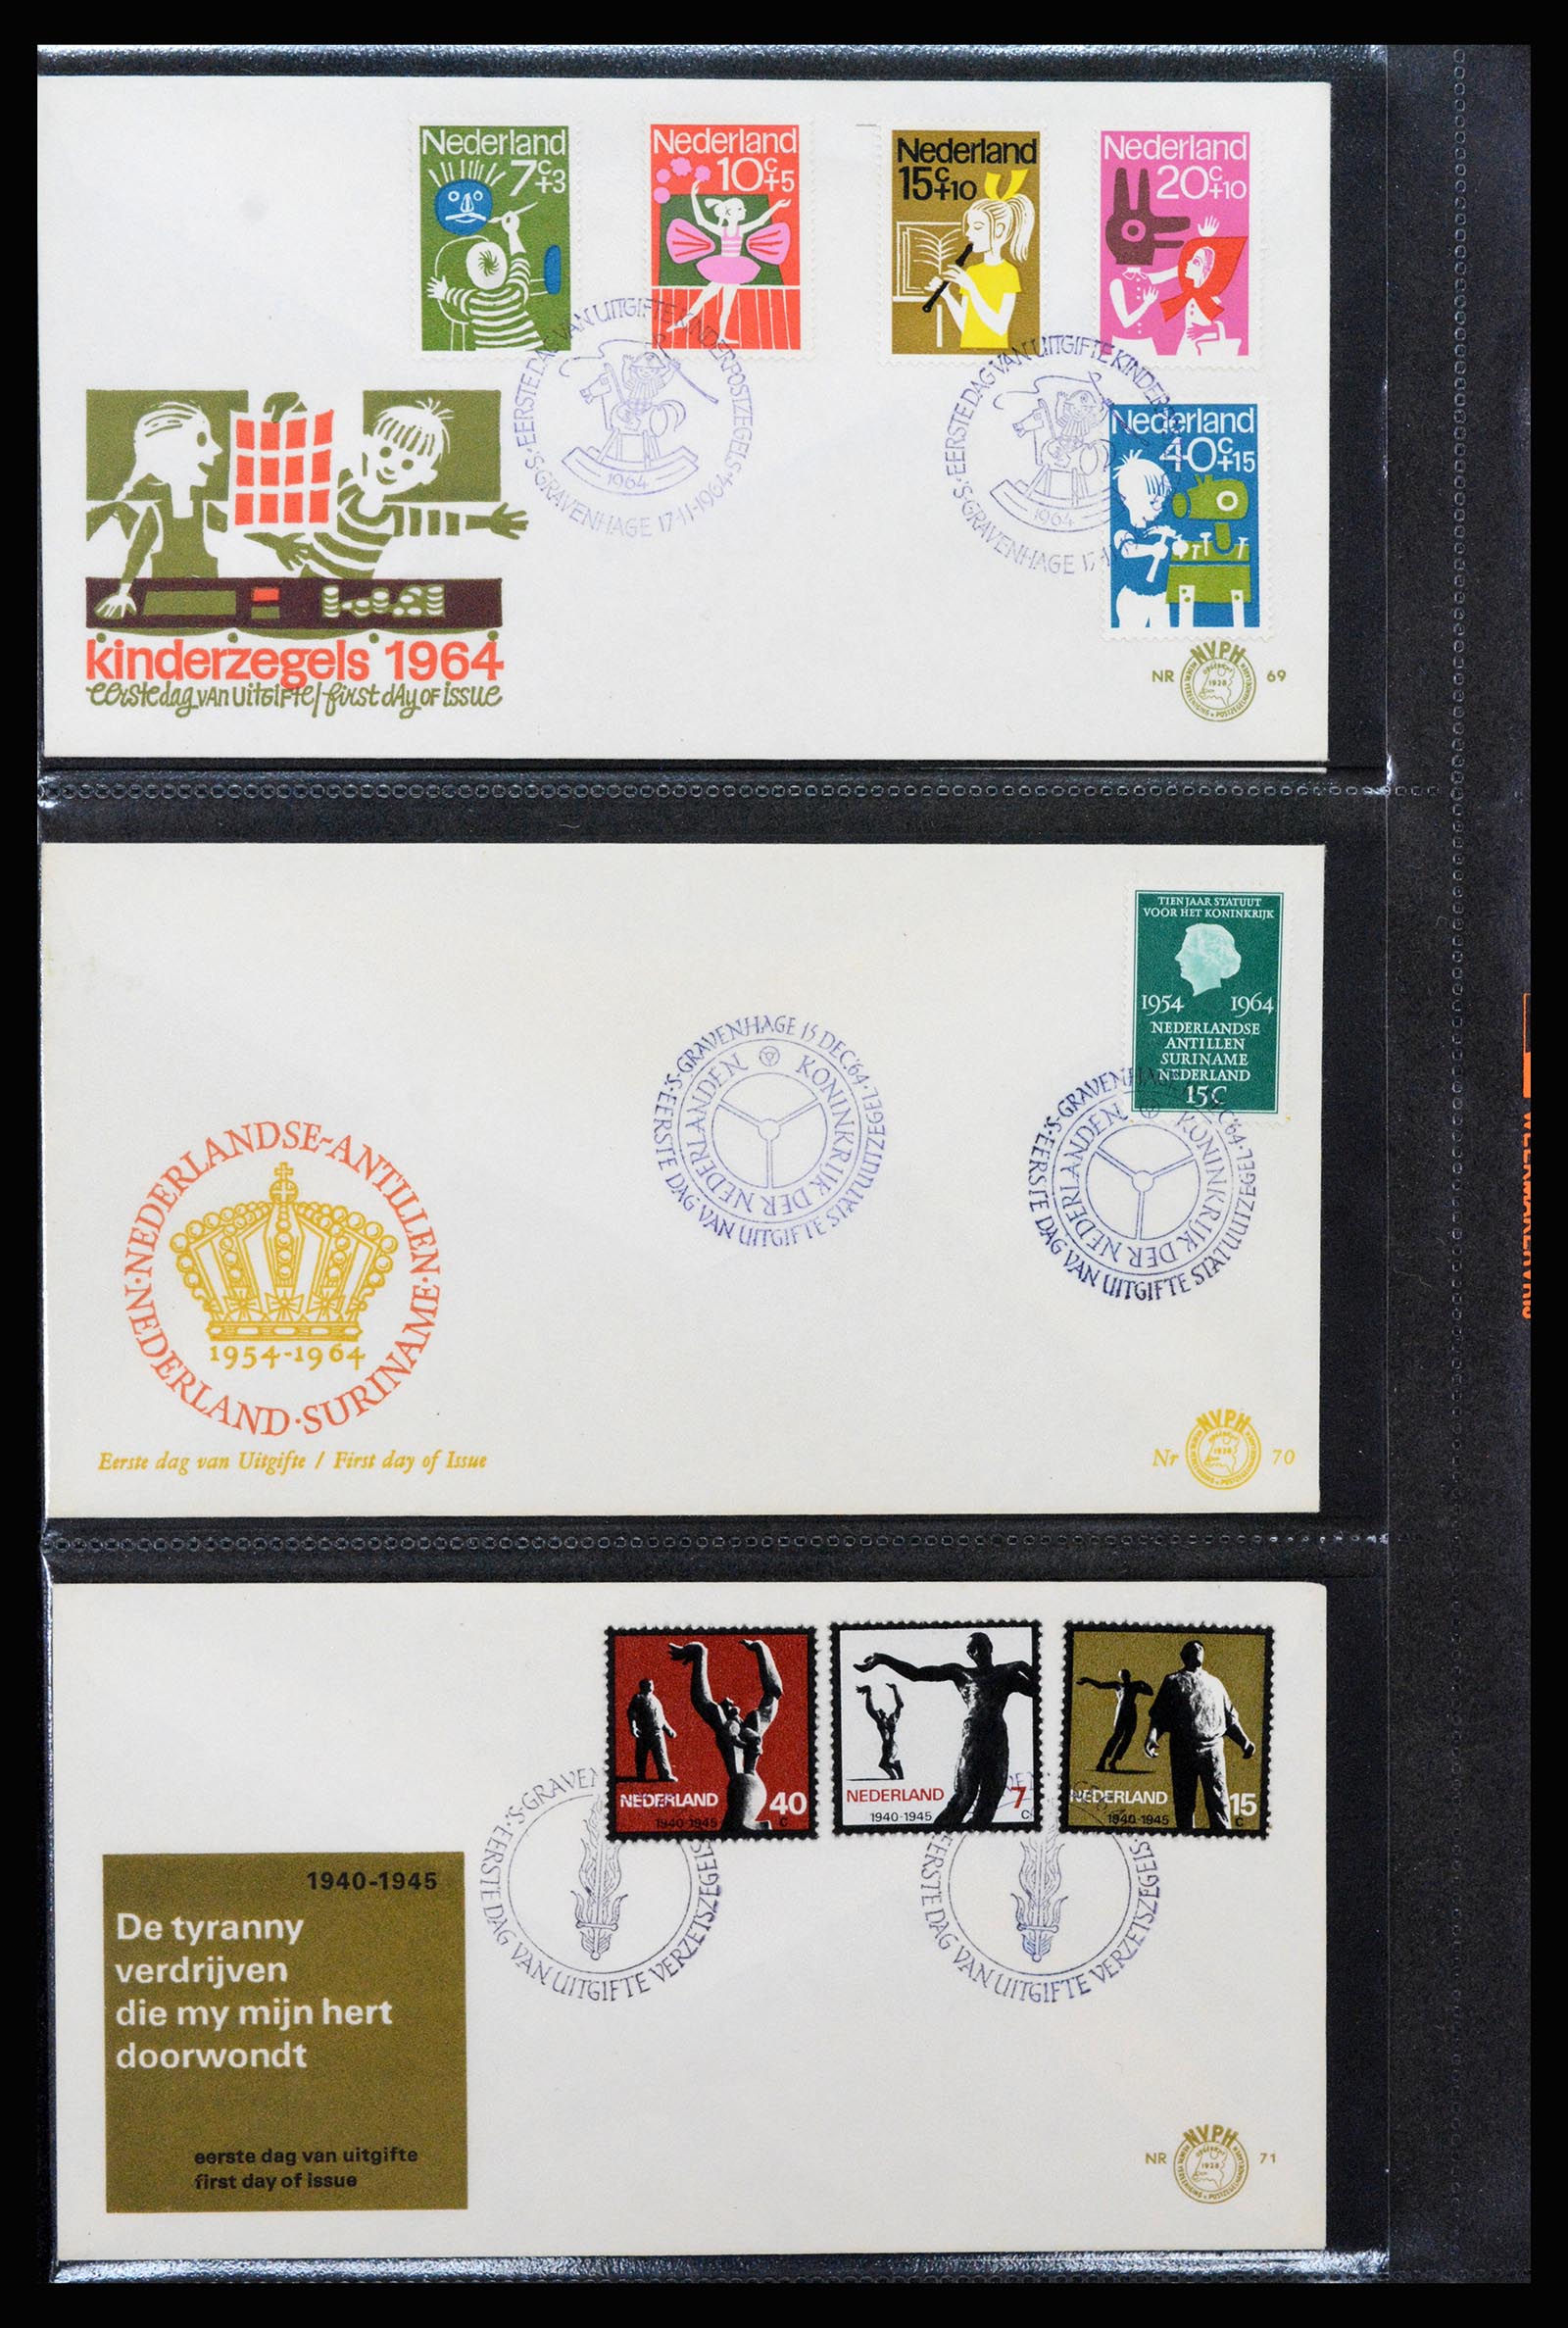 37264 023 - Stamp collection 37264 Netherlands FDC's 1950-1975.